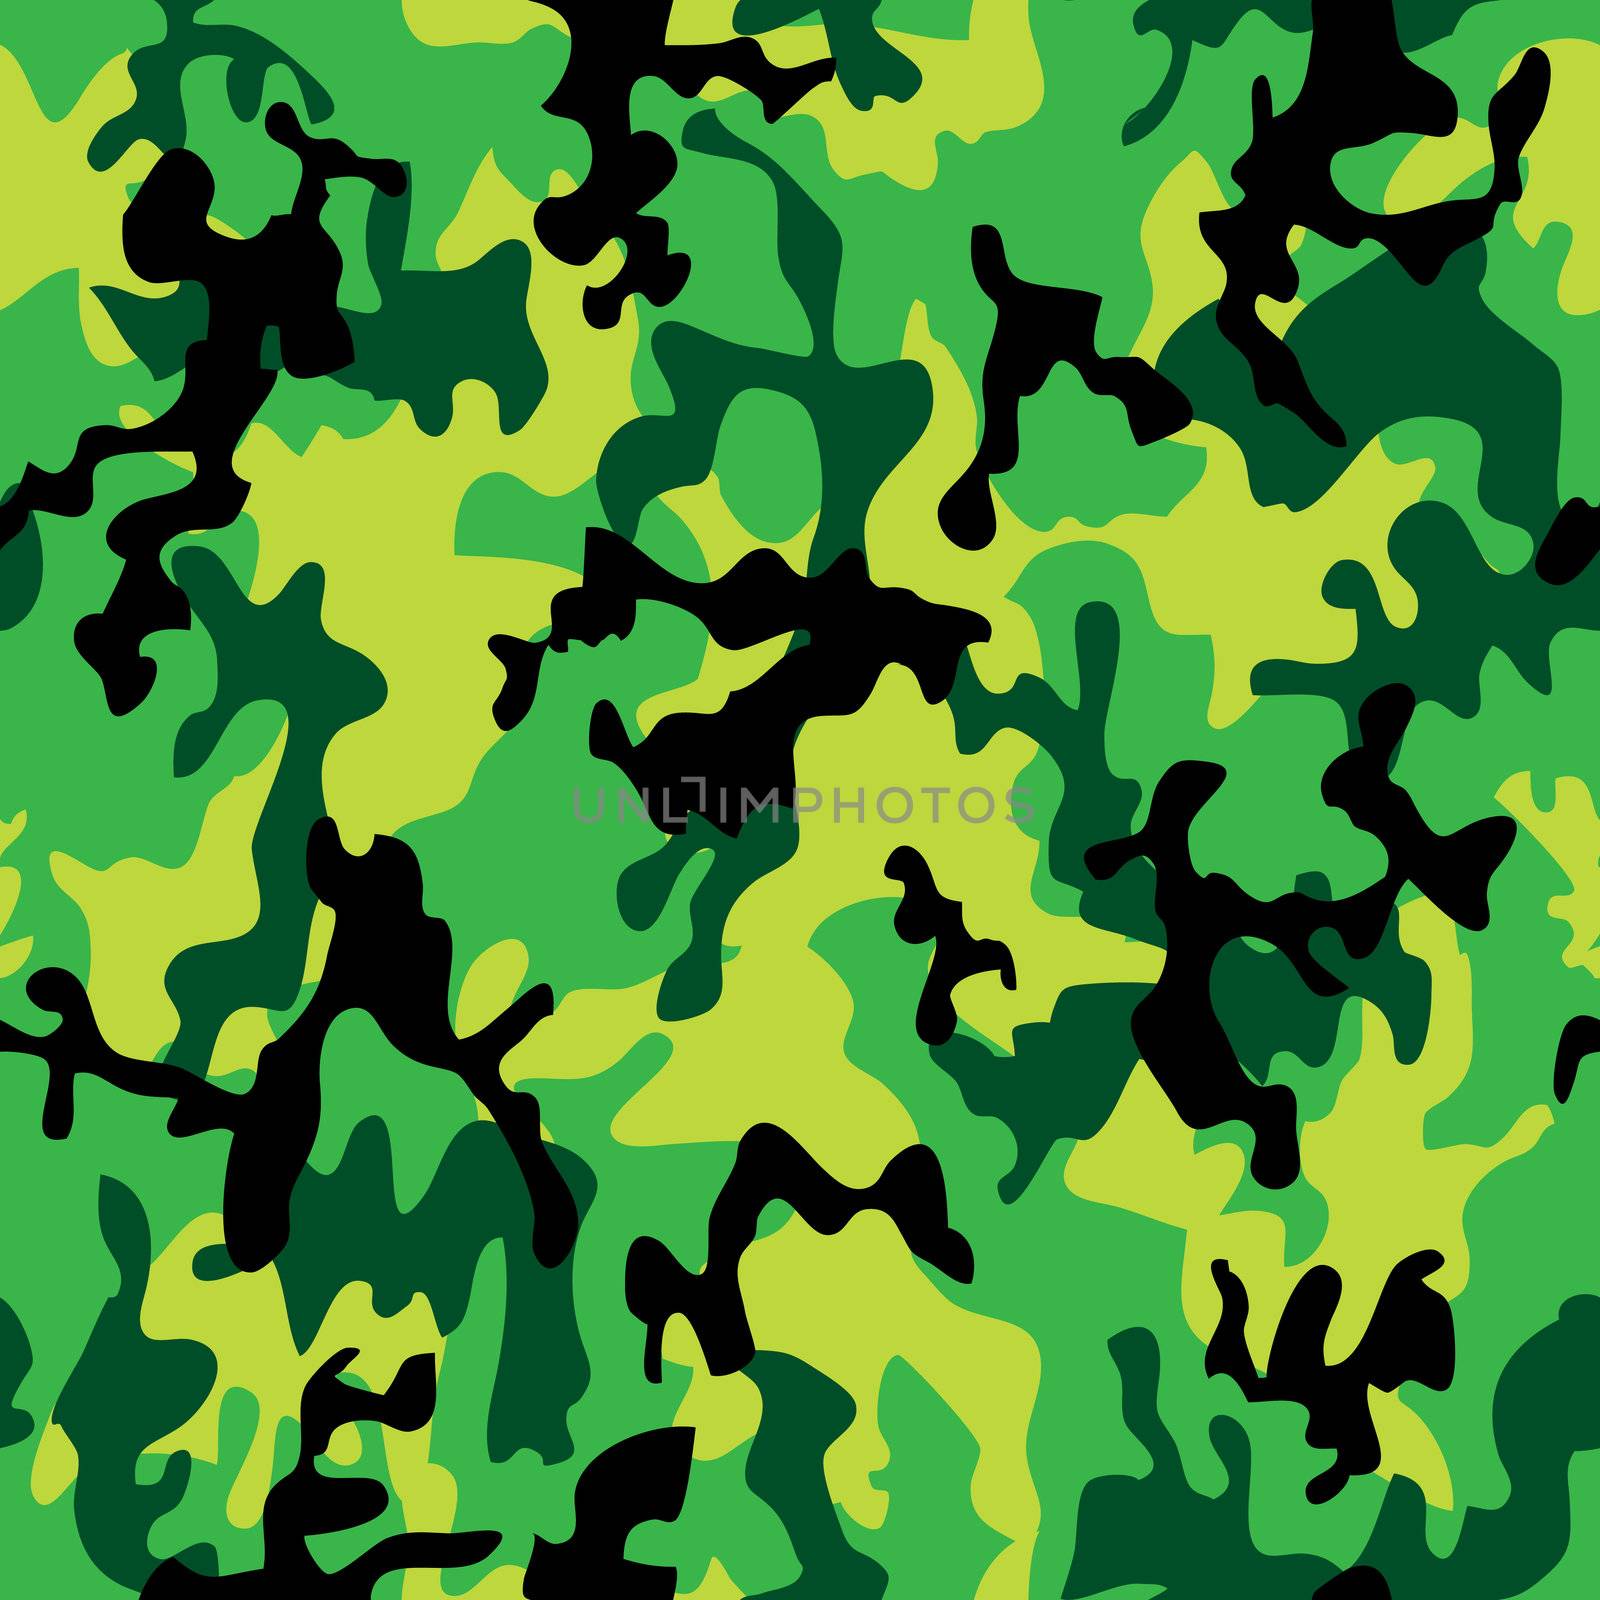 Dark green jungle camouflage with seamless repeating design